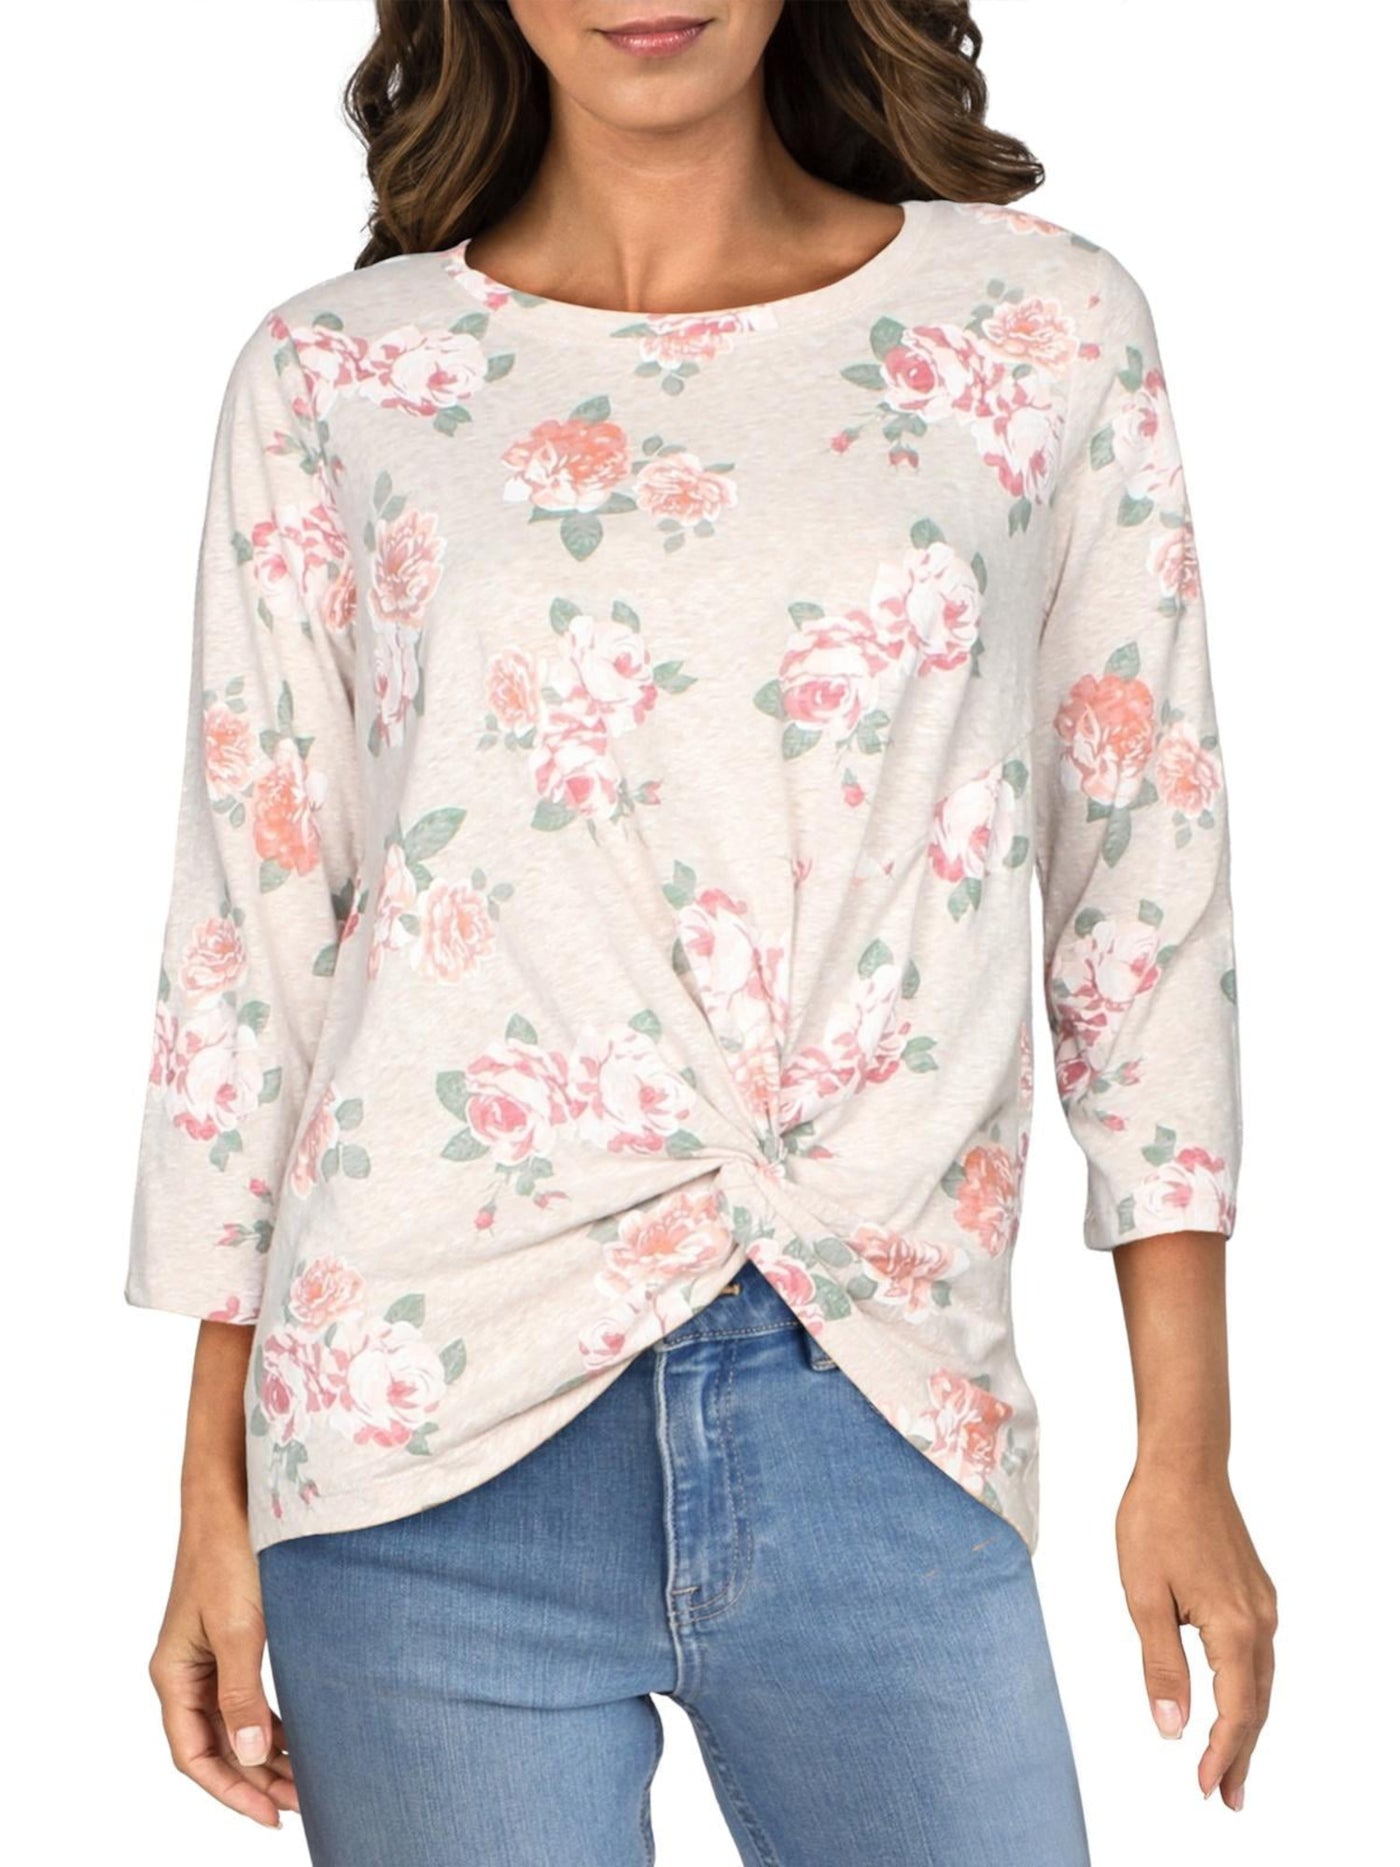 A + A COLLECTION Womens Beige Twist Front Pullover Floral Long Sleeve Round Neck Top S